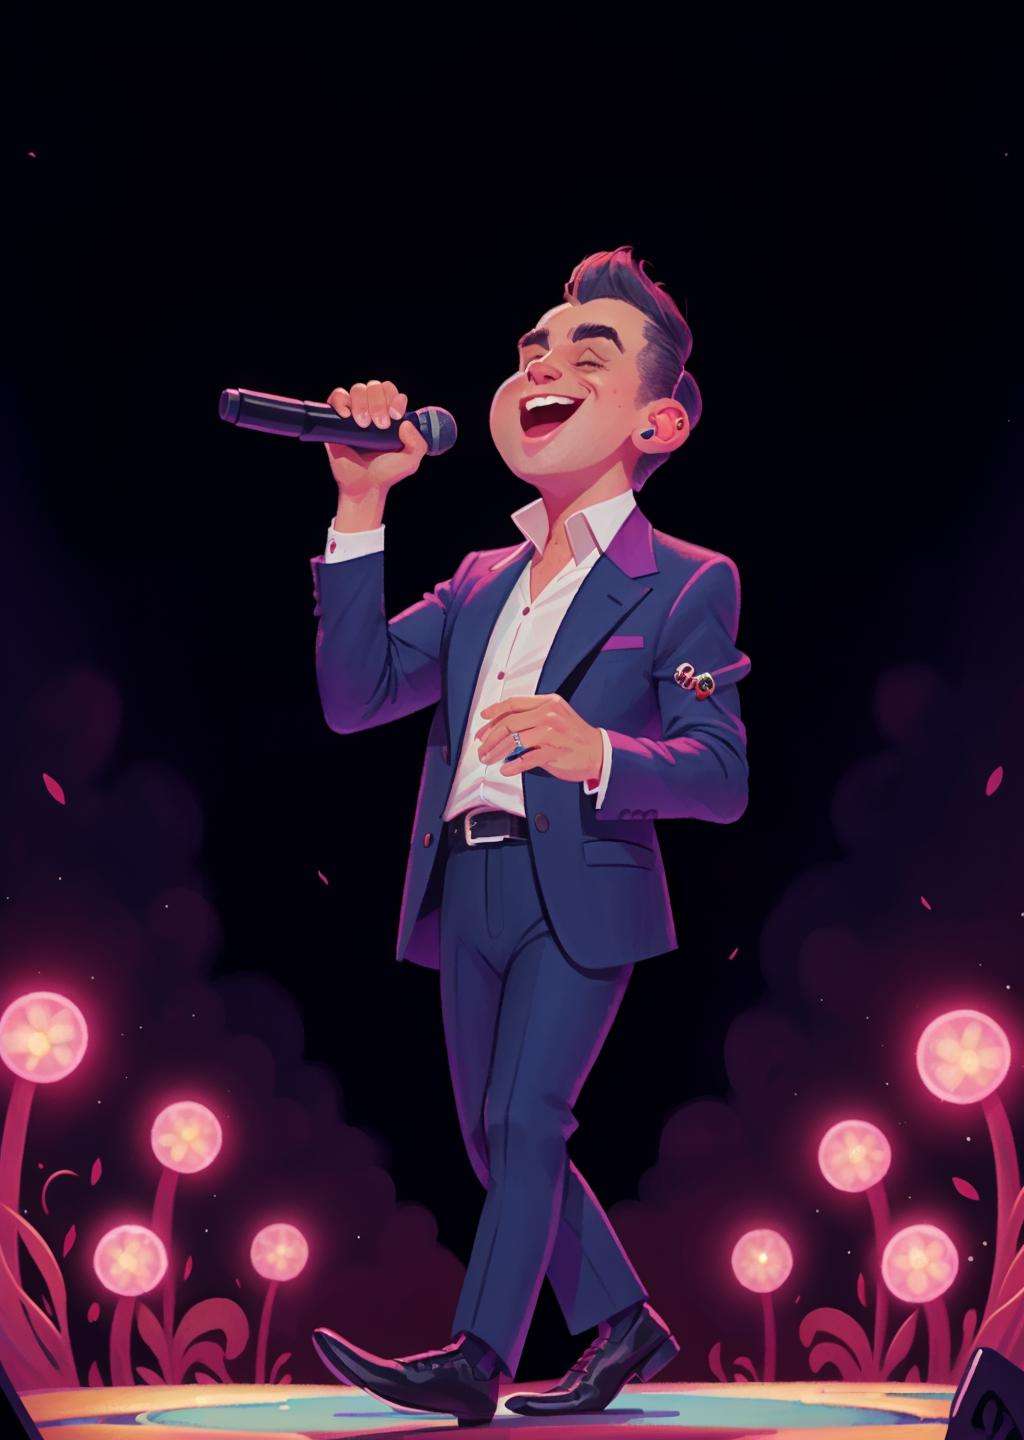 Robbie Williams singing in a concert, whimsical 